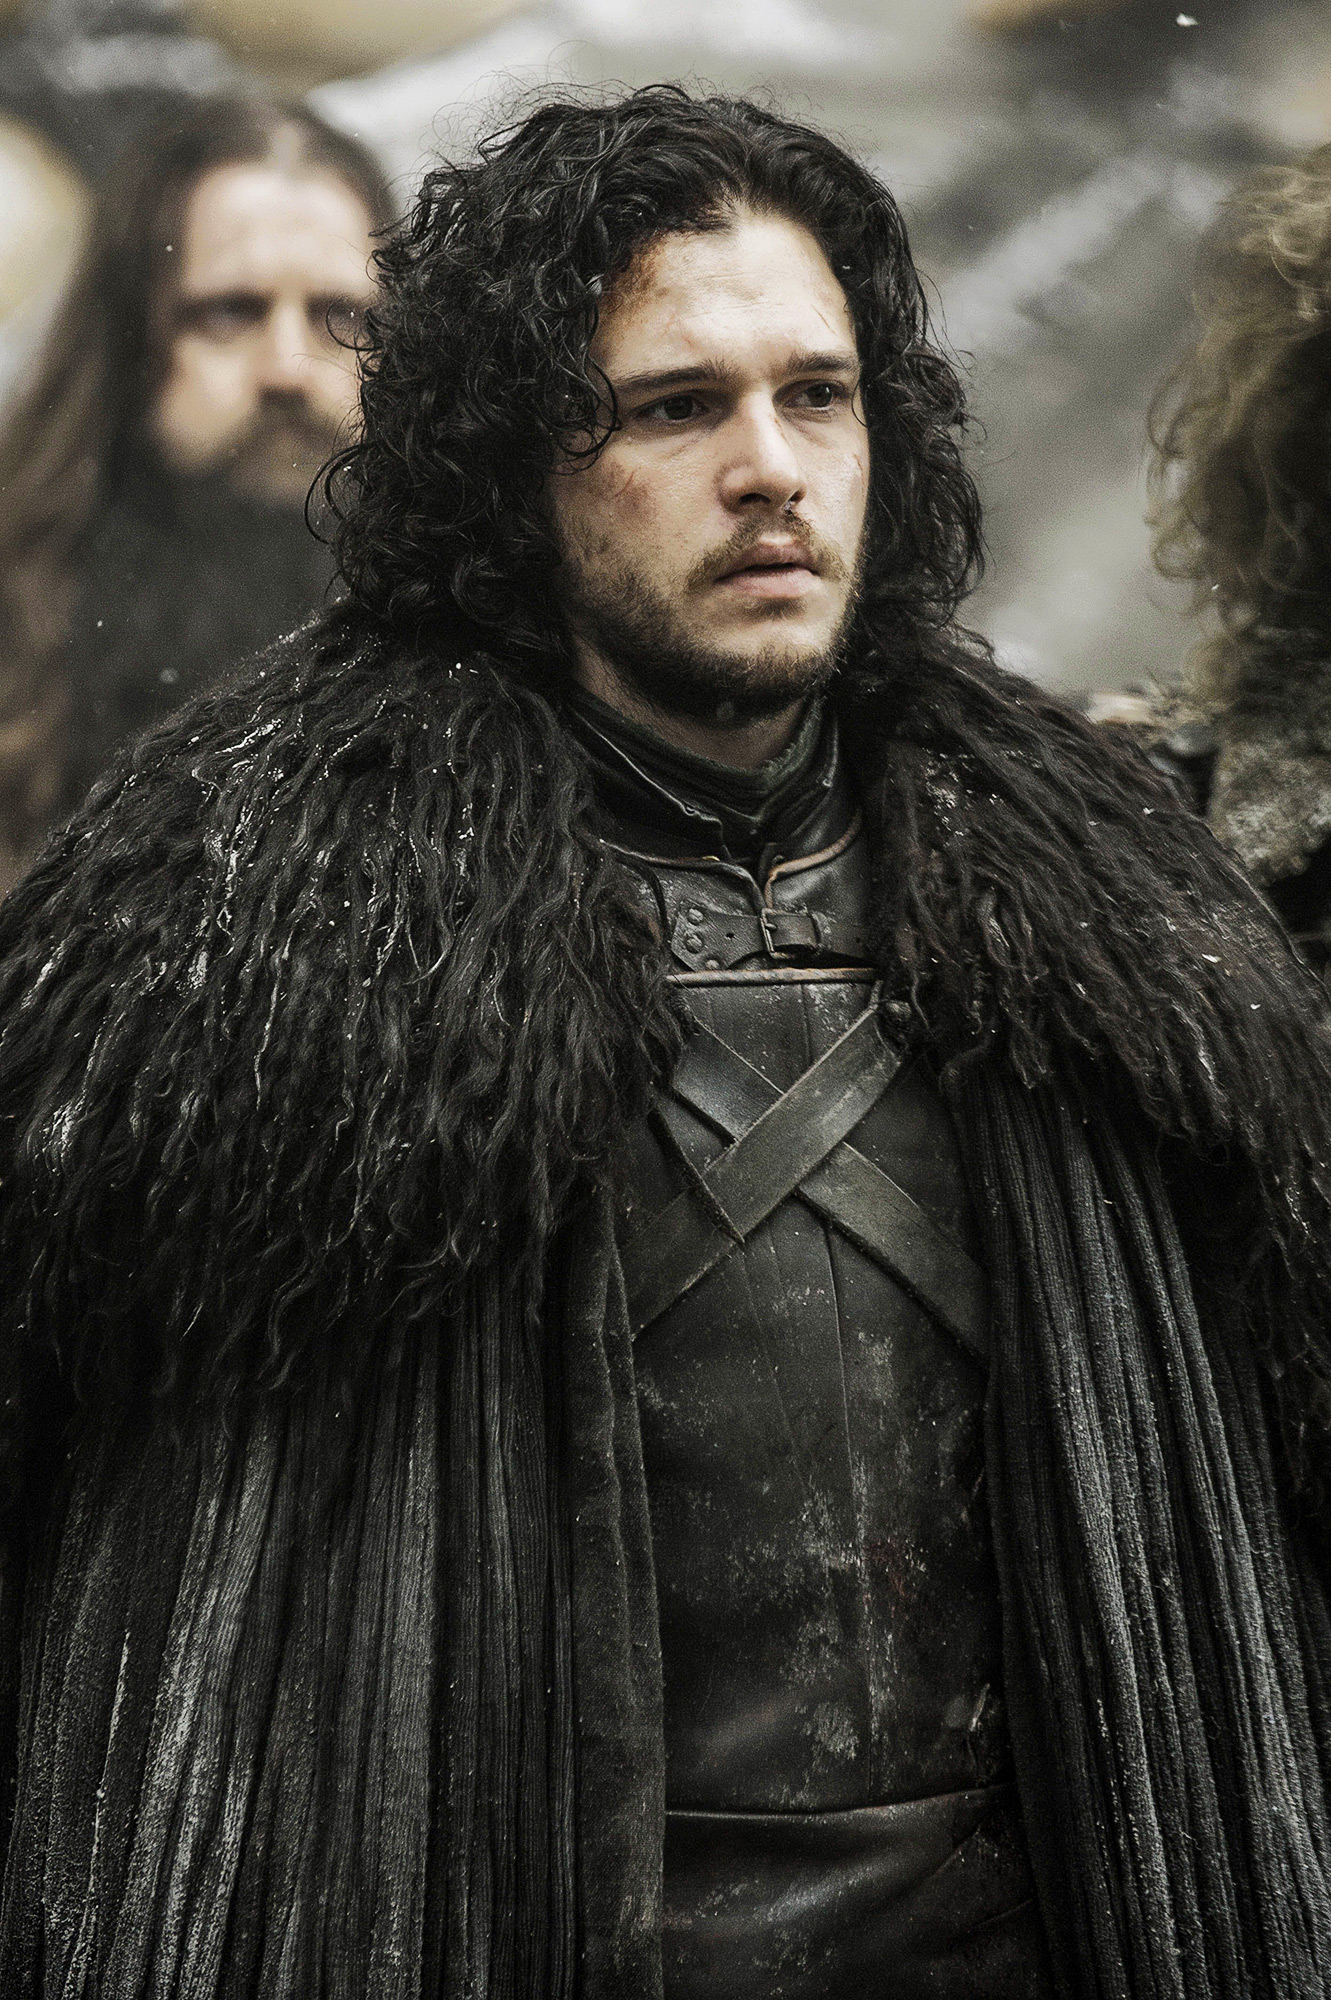 Jon Snow Series: What to Know About the 'Game of Thrones' Sequel